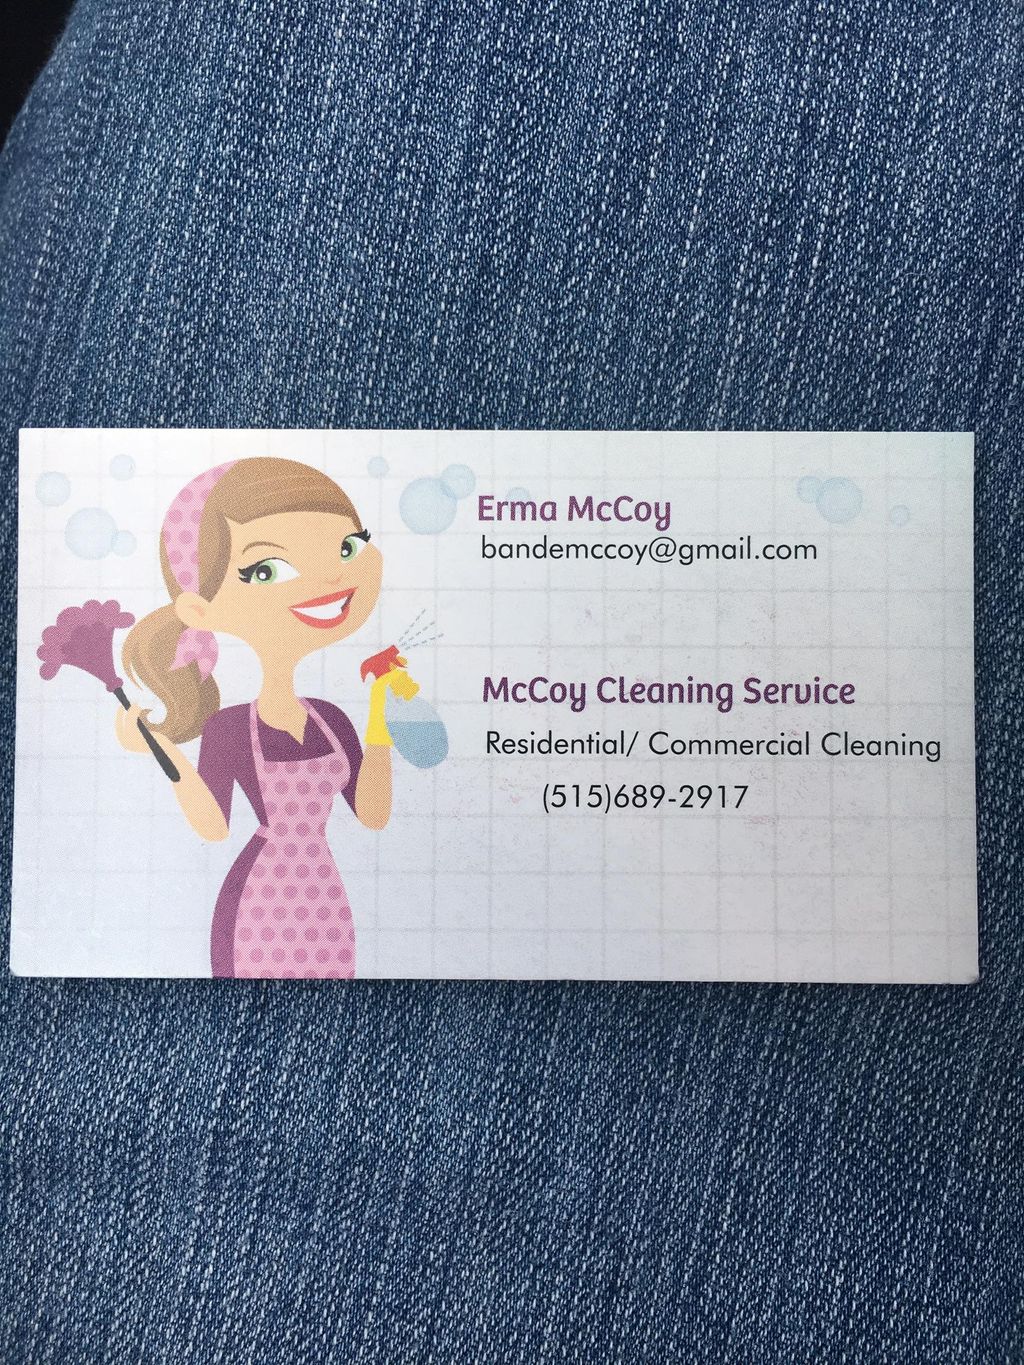 McCoy Cleaning Service